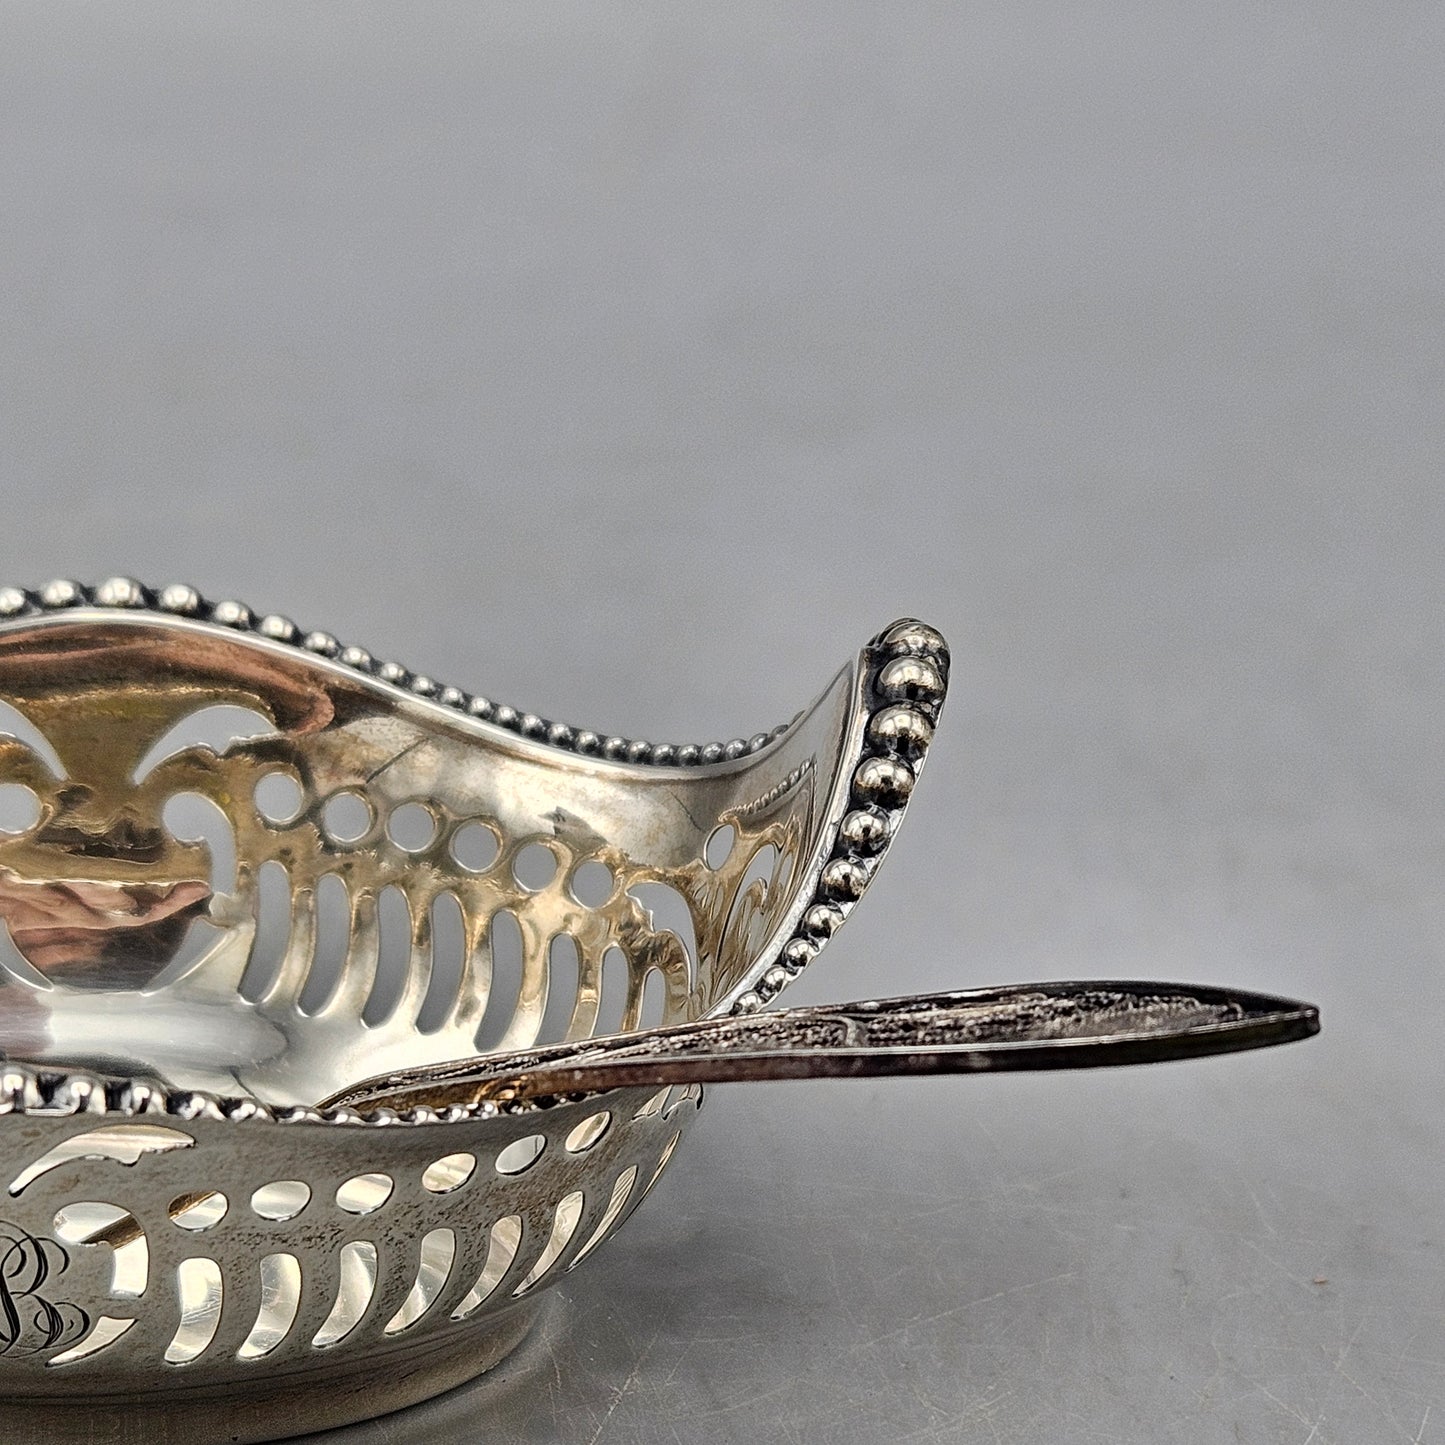 Beautiful Vintage Monogrammed Sterling Silver Open Salt with Spoon by Shreve, Crump & Low Co.